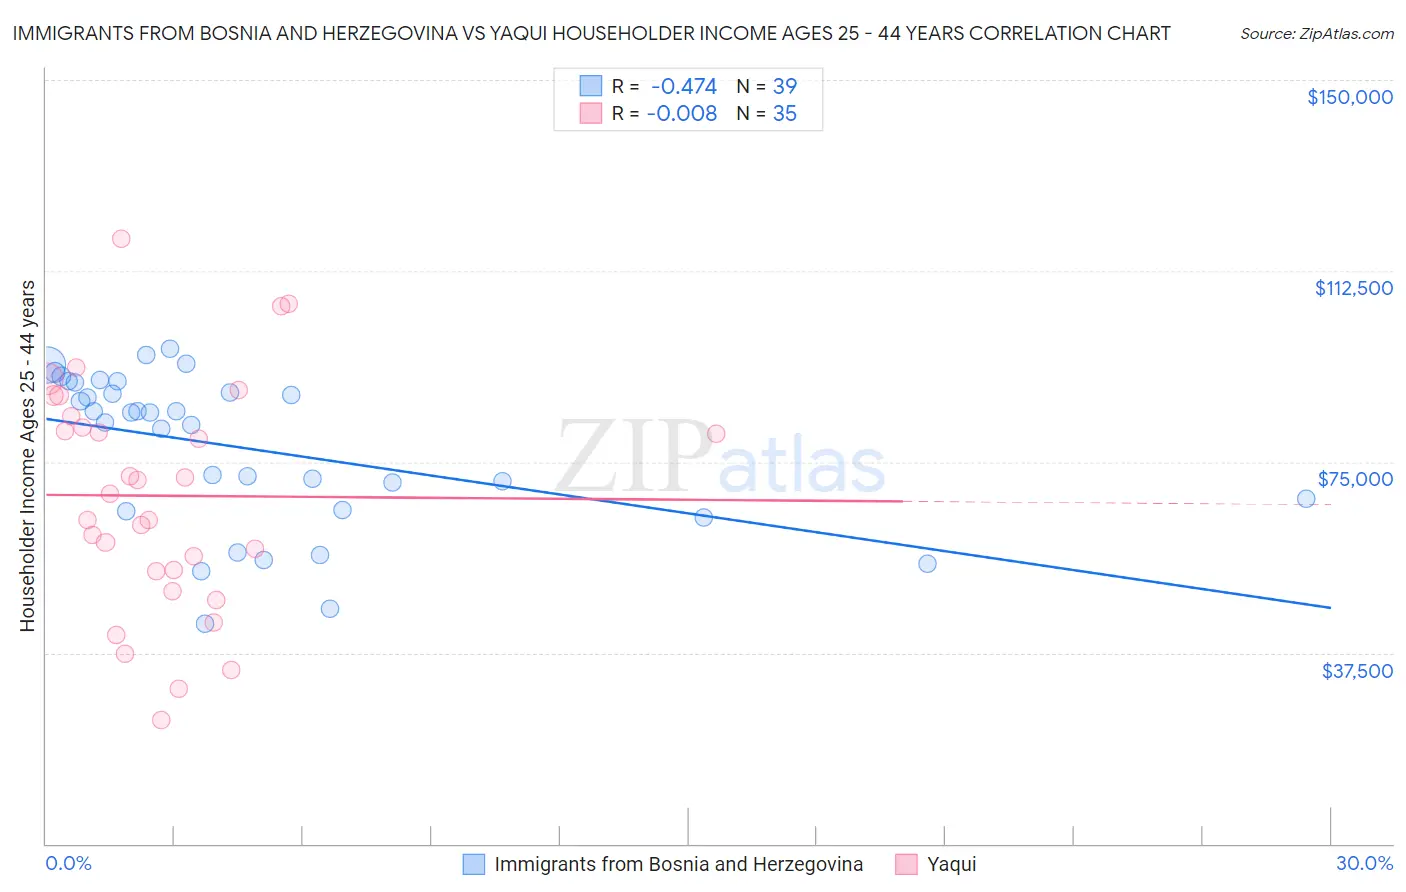 Immigrants from Bosnia and Herzegovina vs Yaqui Householder Income Ages 25 - 44 years